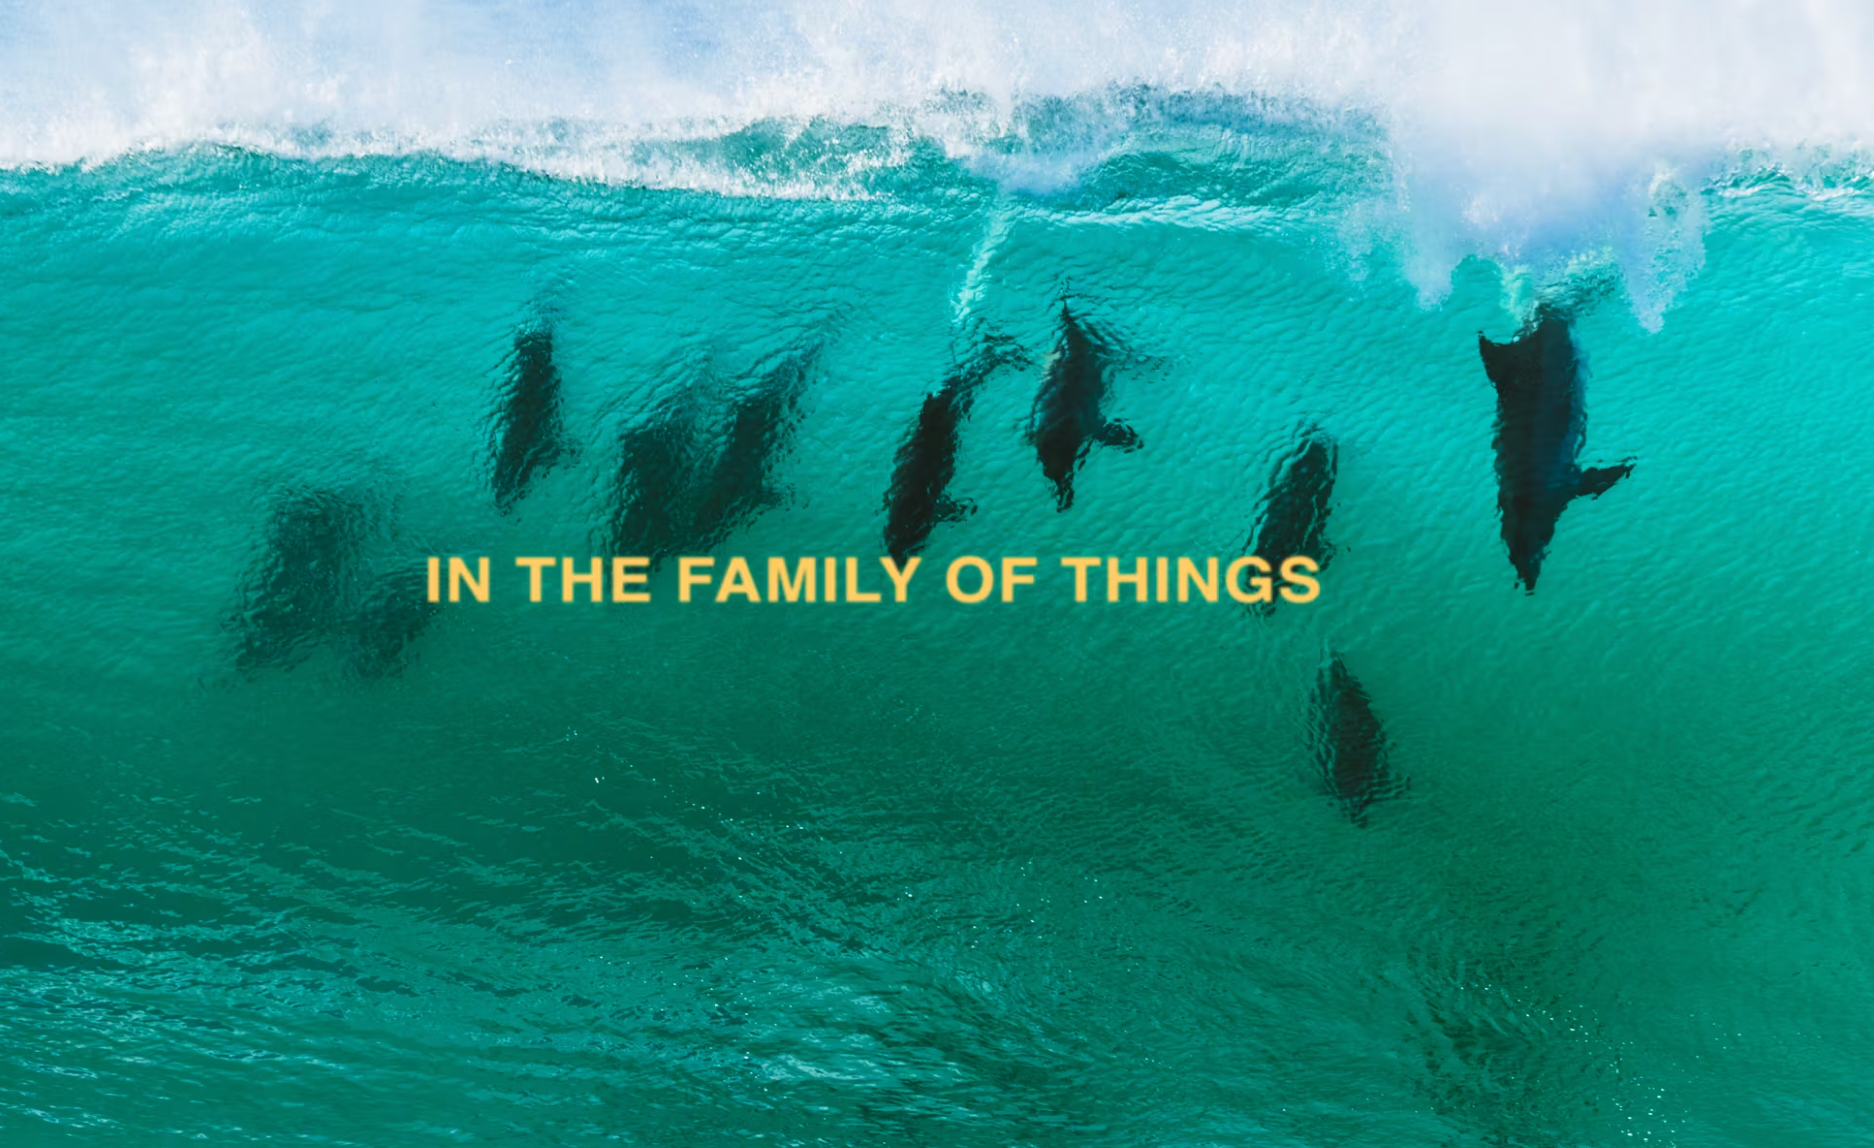 In the Family of Things - New Surf Film